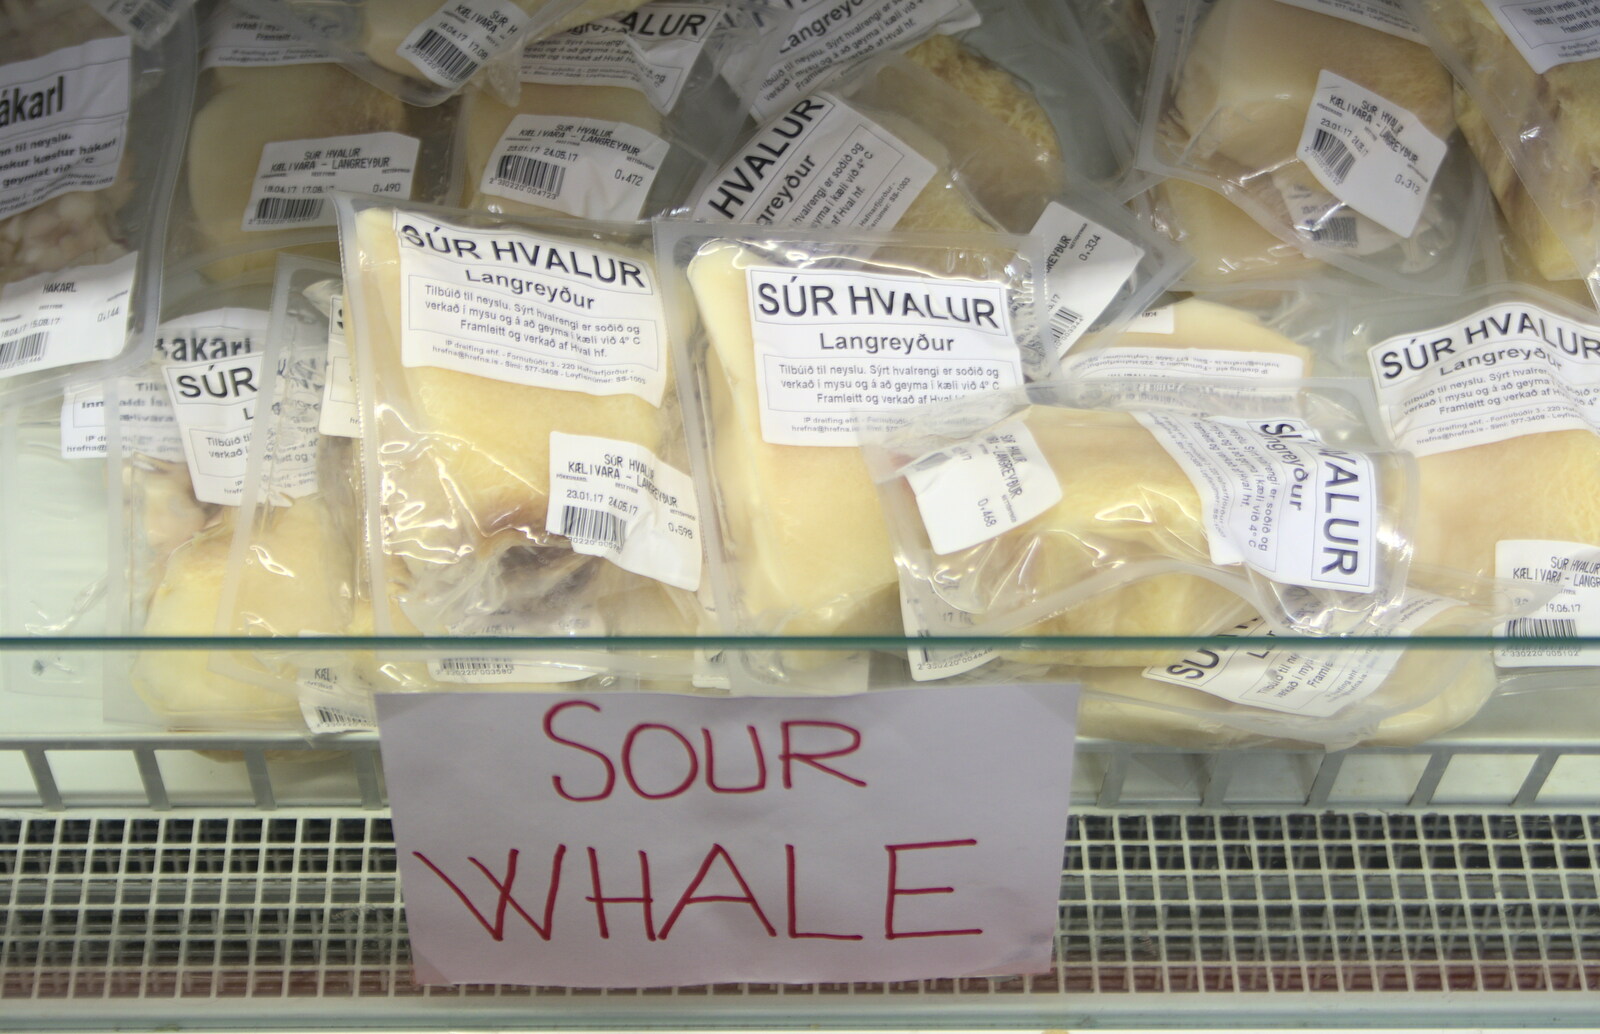 The supermarket is selling sour whale blobs from Hallgrímskirkja Cathedral and Whale Watching, Reykjavik - 21st April 2017